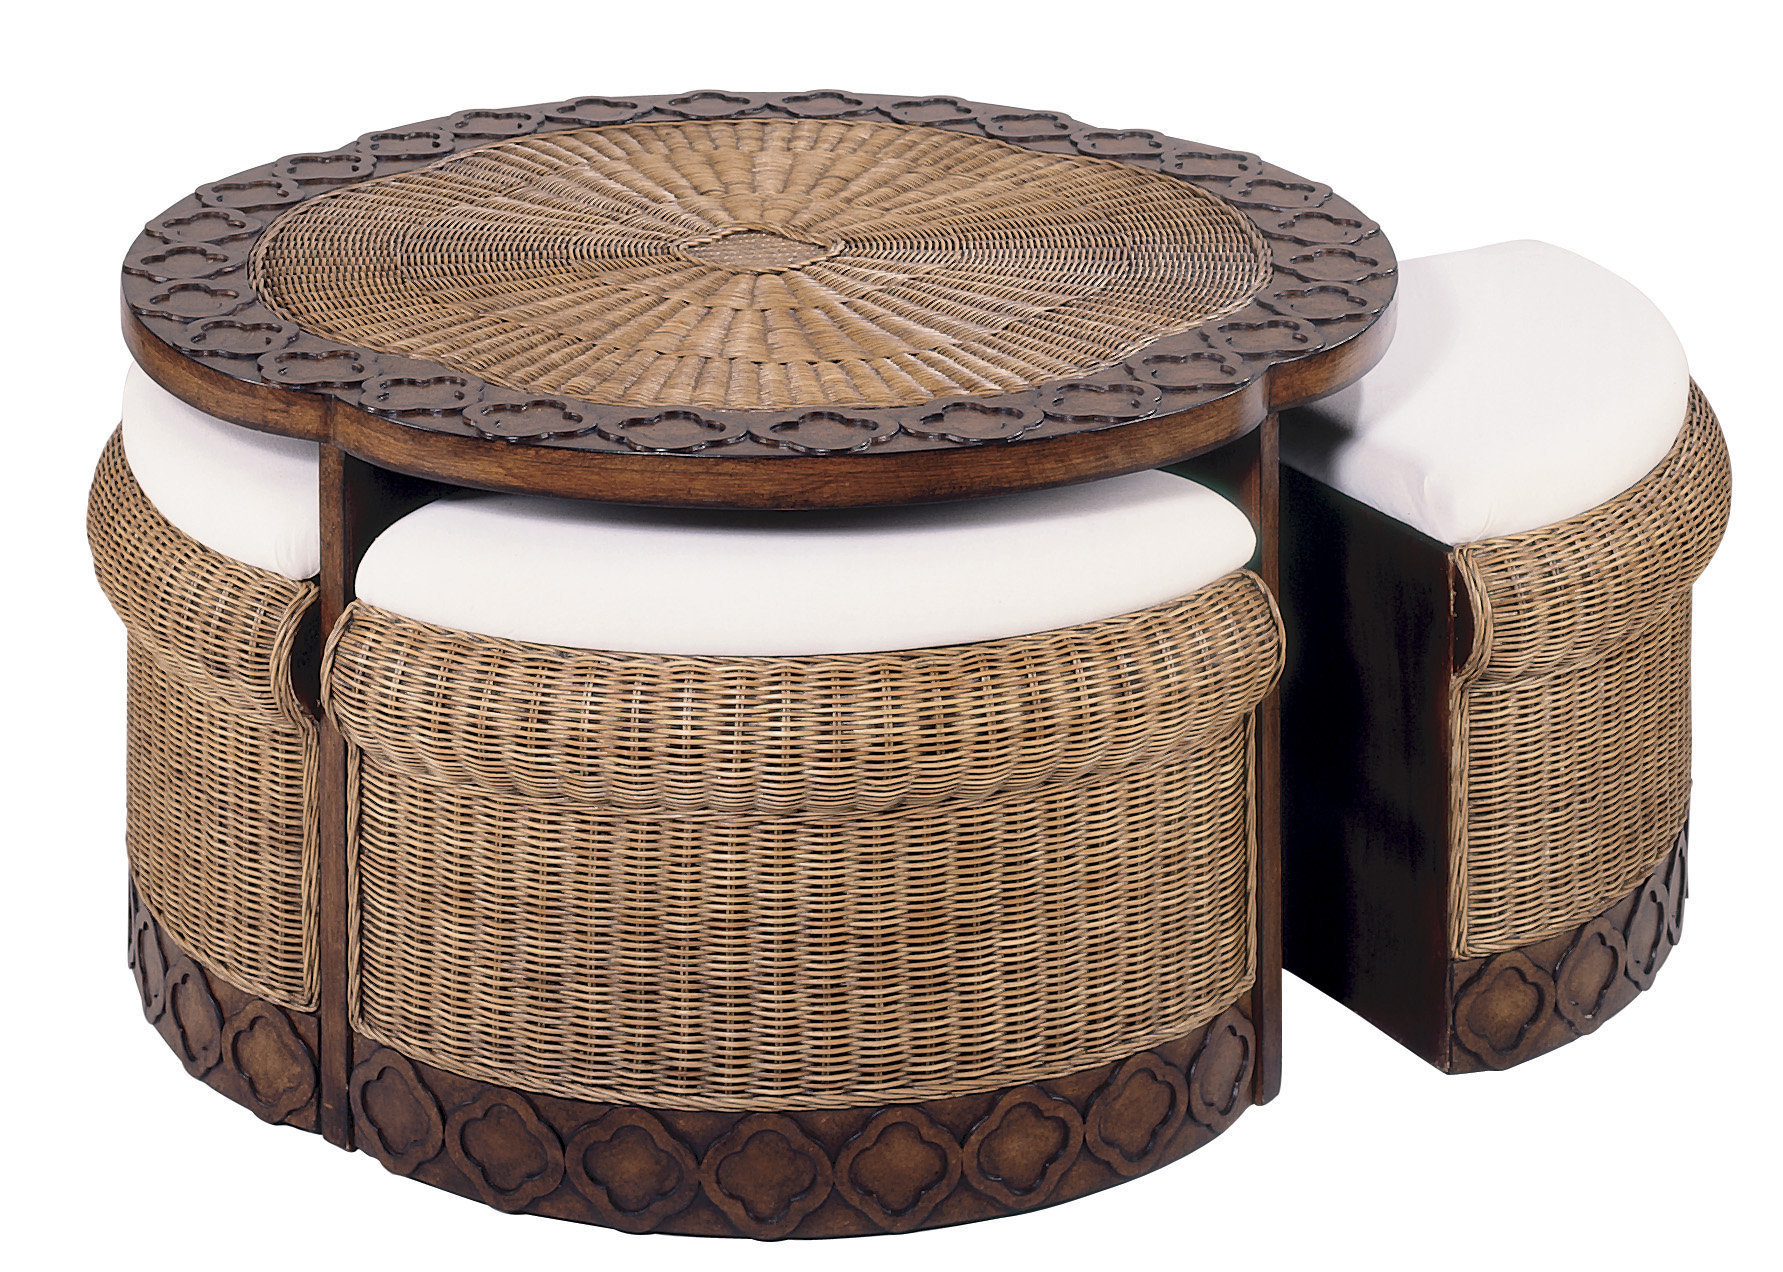 Wicker Coffee Table Design Images Photos Pictures